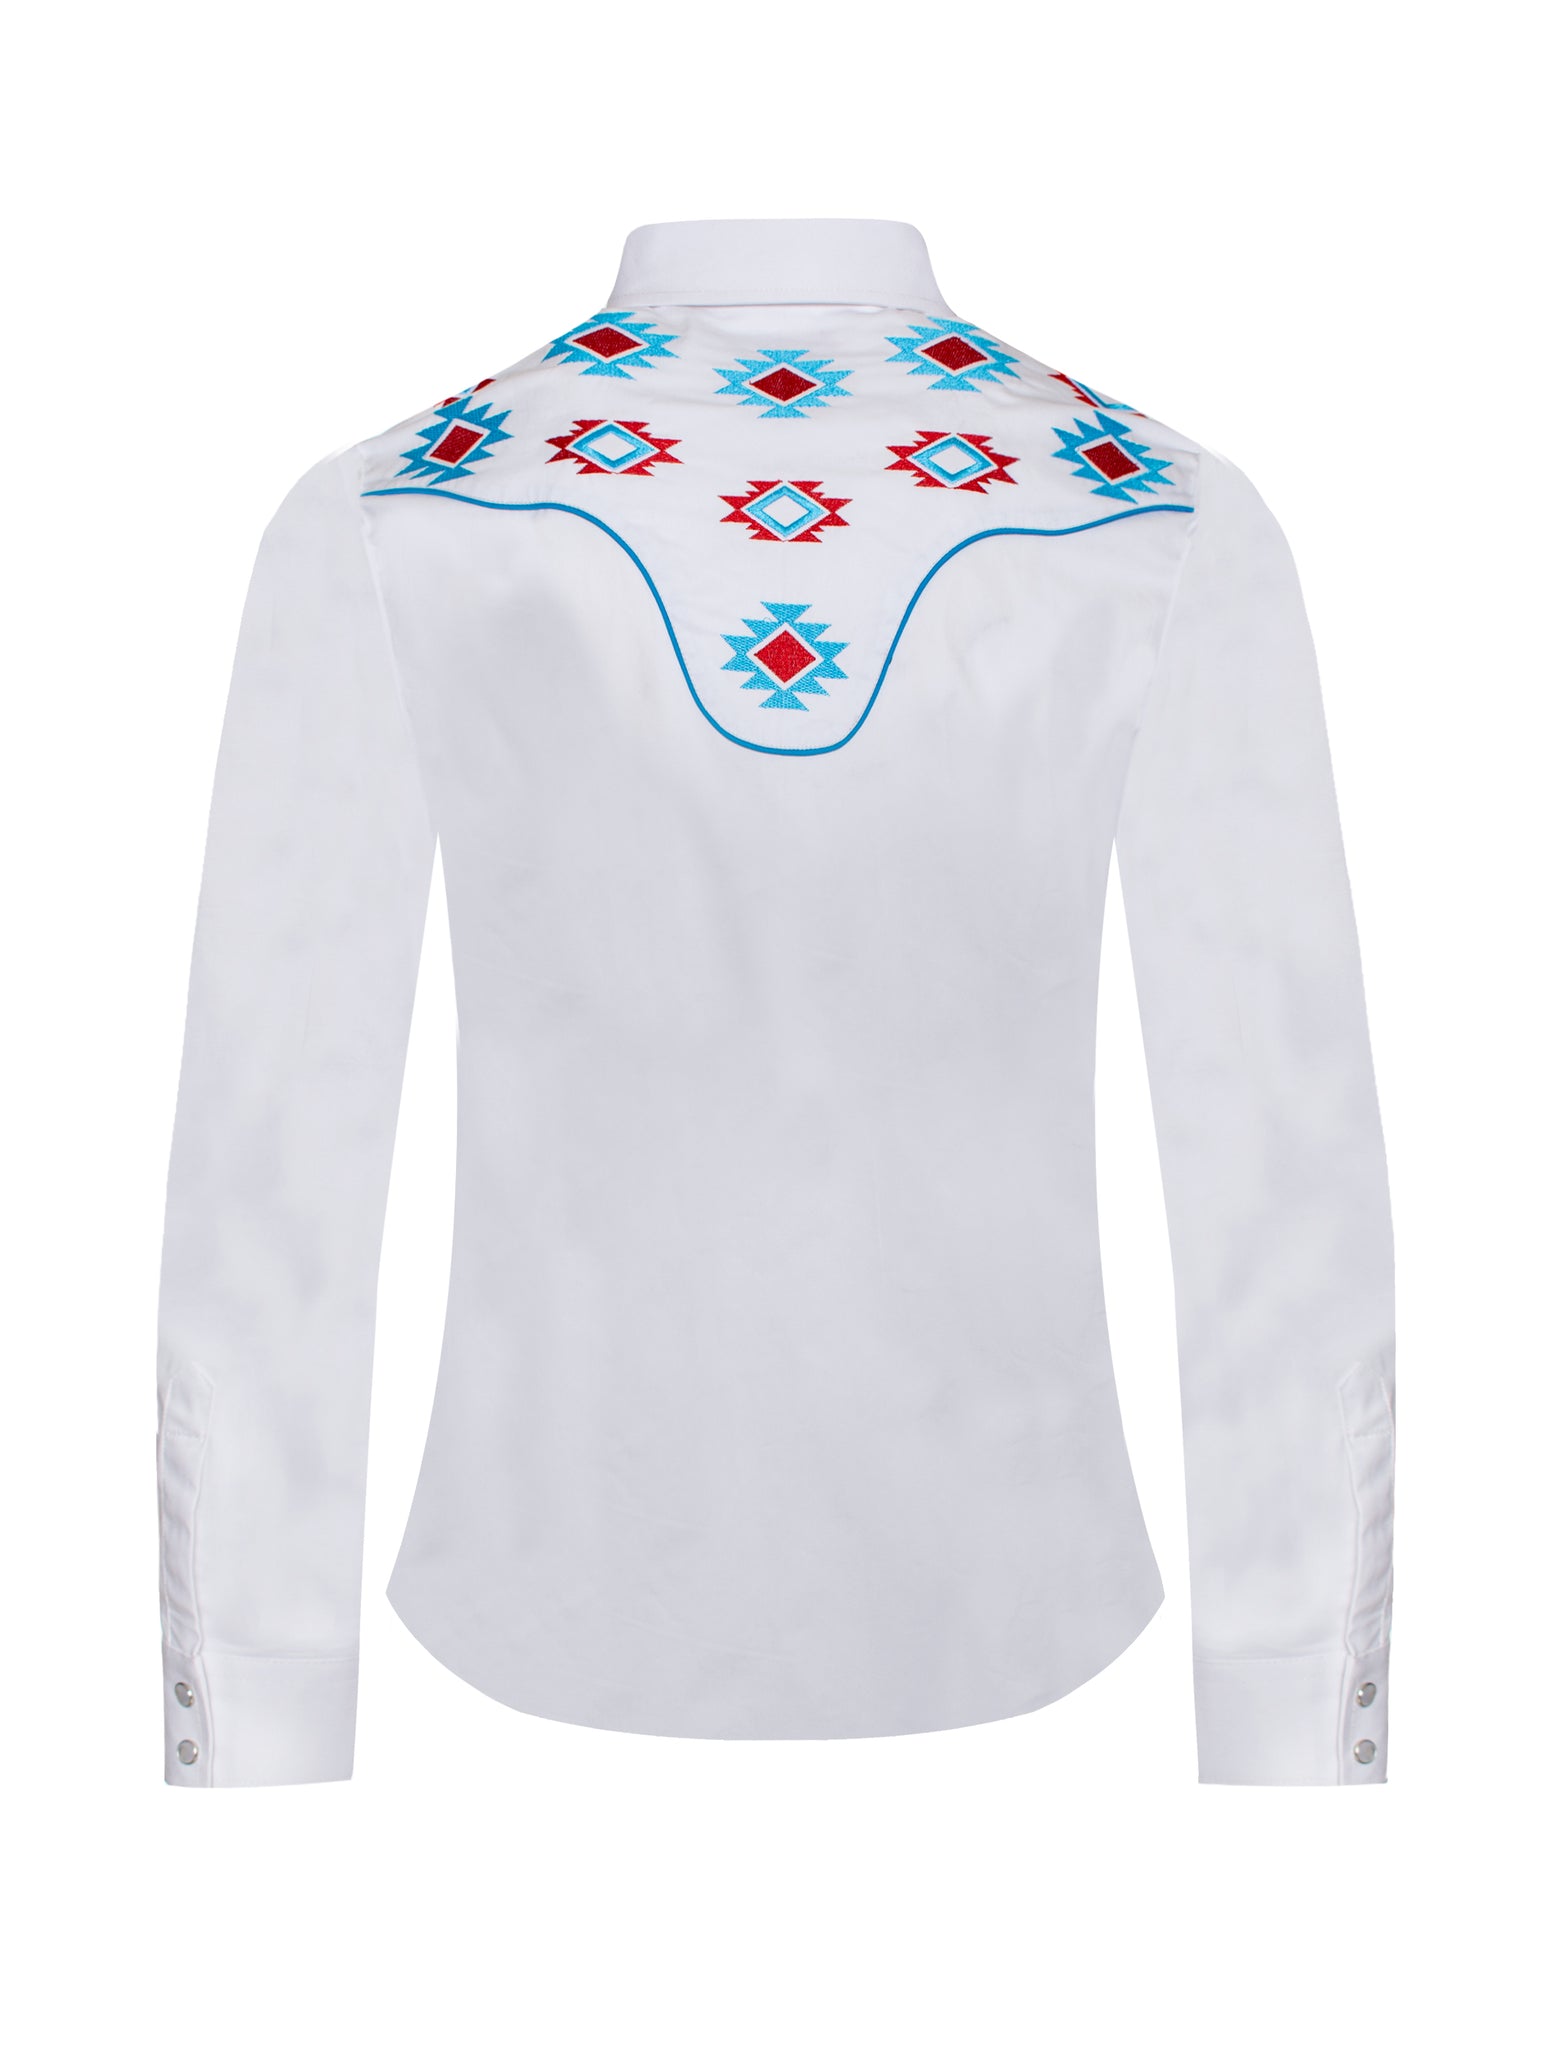 Women’s Western Embroidered Shirts-LS500-521